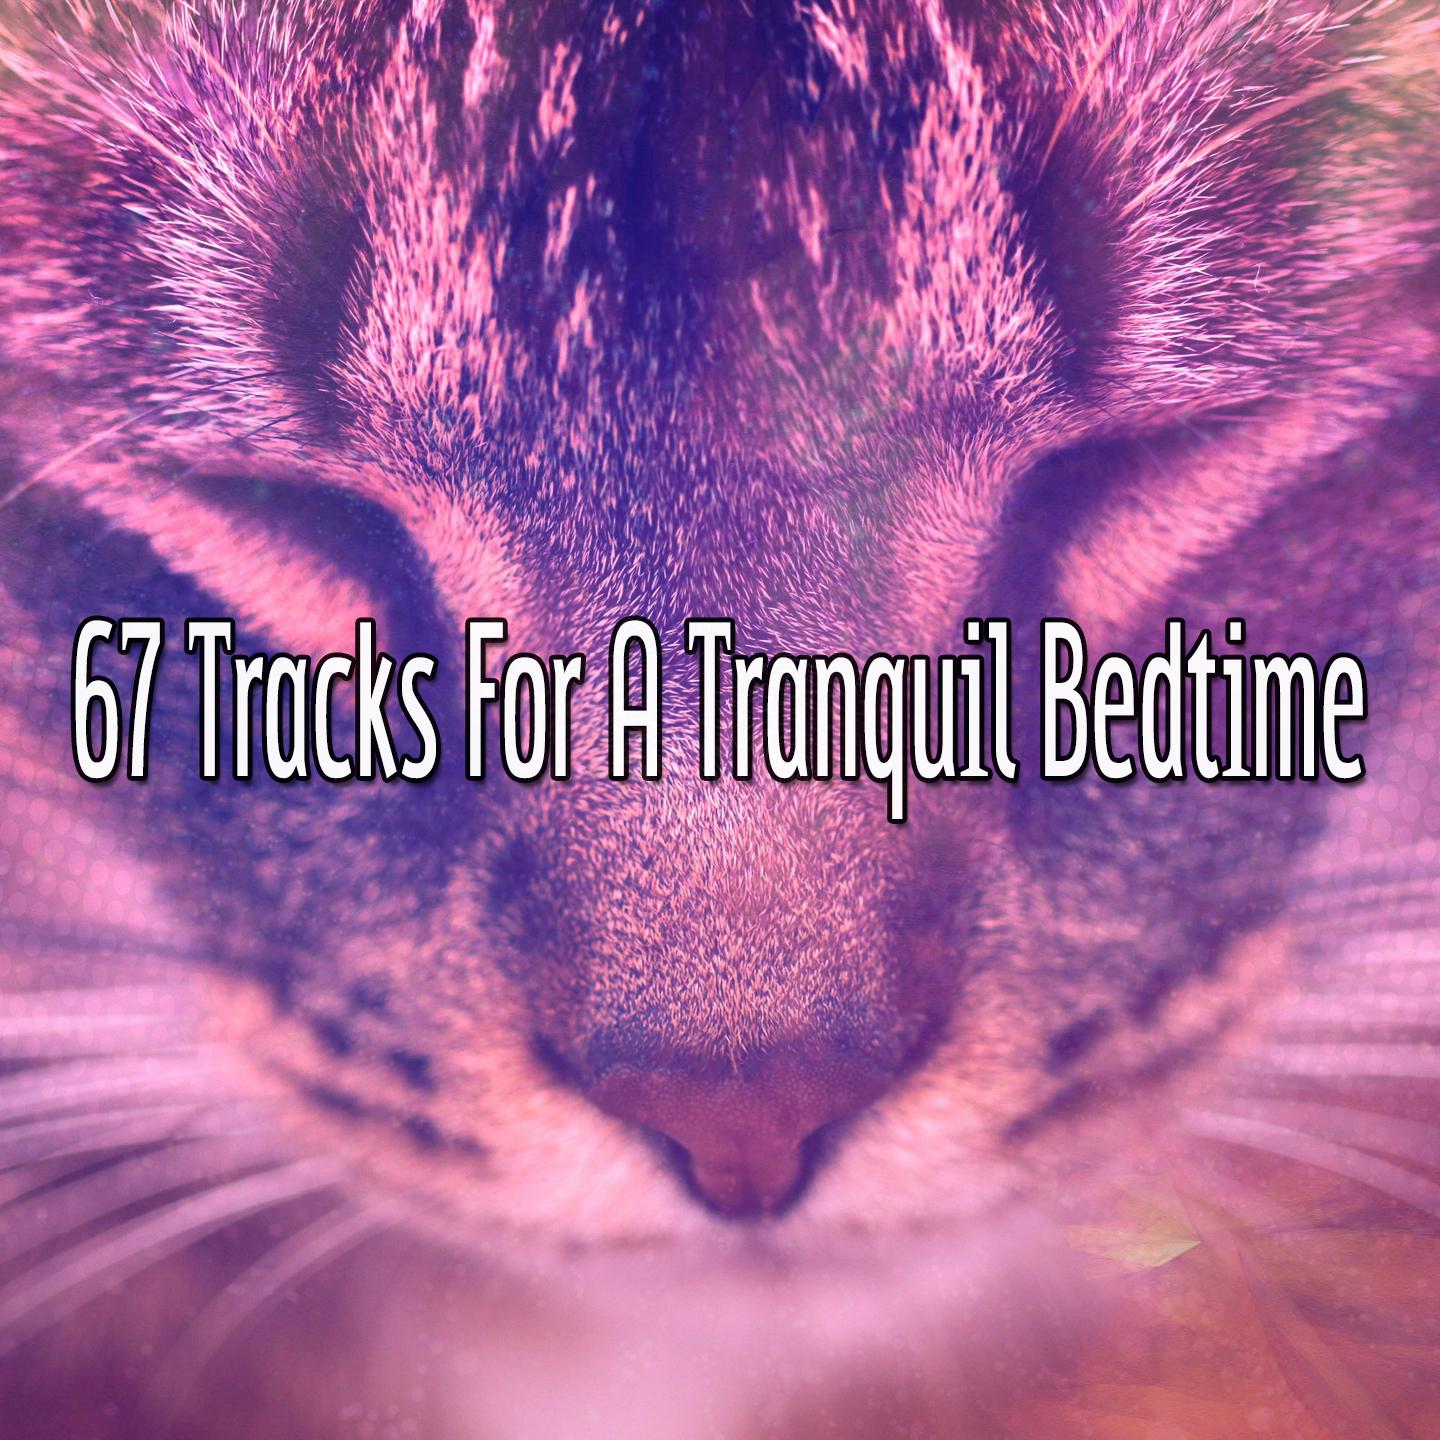 67 Tracks For A Tranquil Bedtime